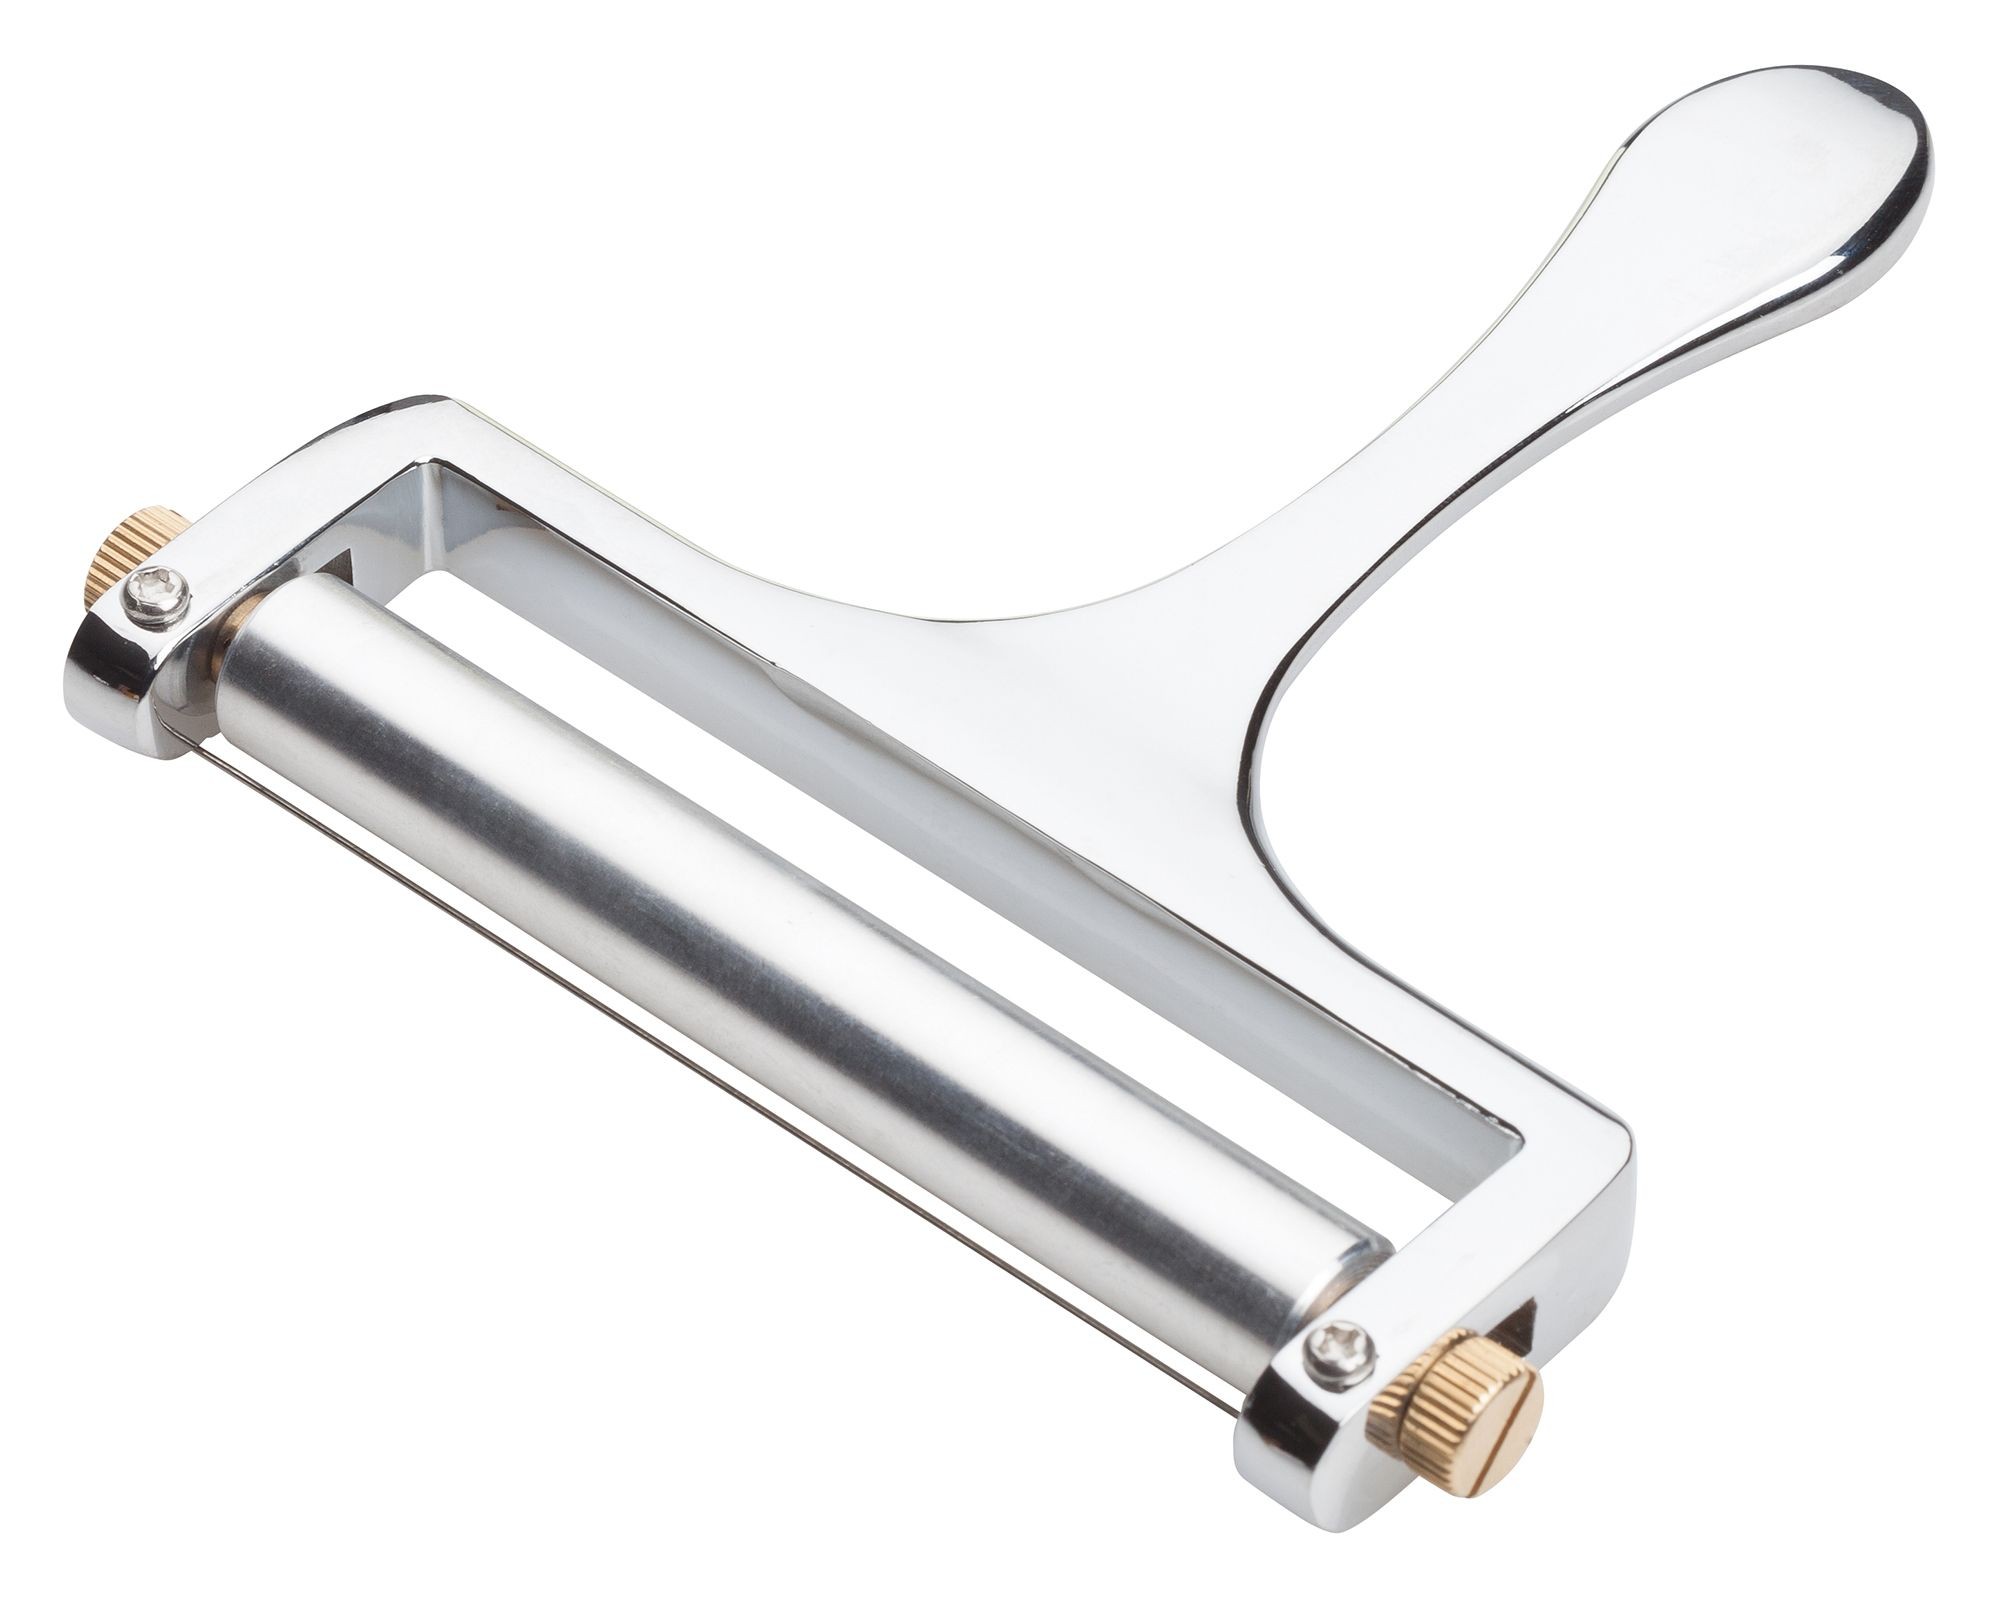 Winco ACS-4 Cast Aluminum Cheese Slicer with Stainless Steel Wire